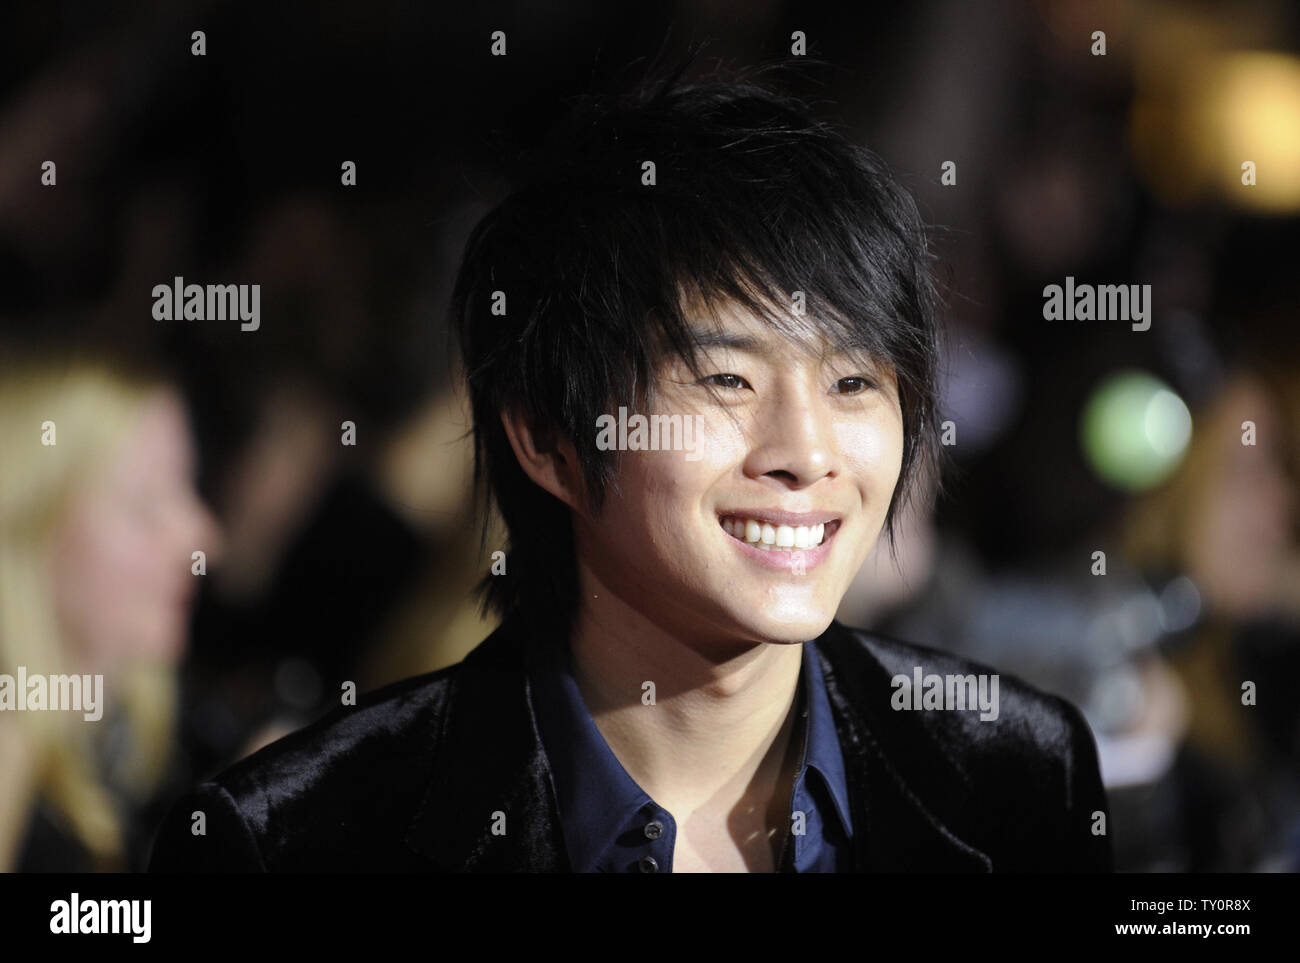 Cast member Justin Chon attends the premiere of the film 'Twilight'  in Los Angeles on November 17, 2008. (UPI Photo/ Phil McCarten) Stock Photo